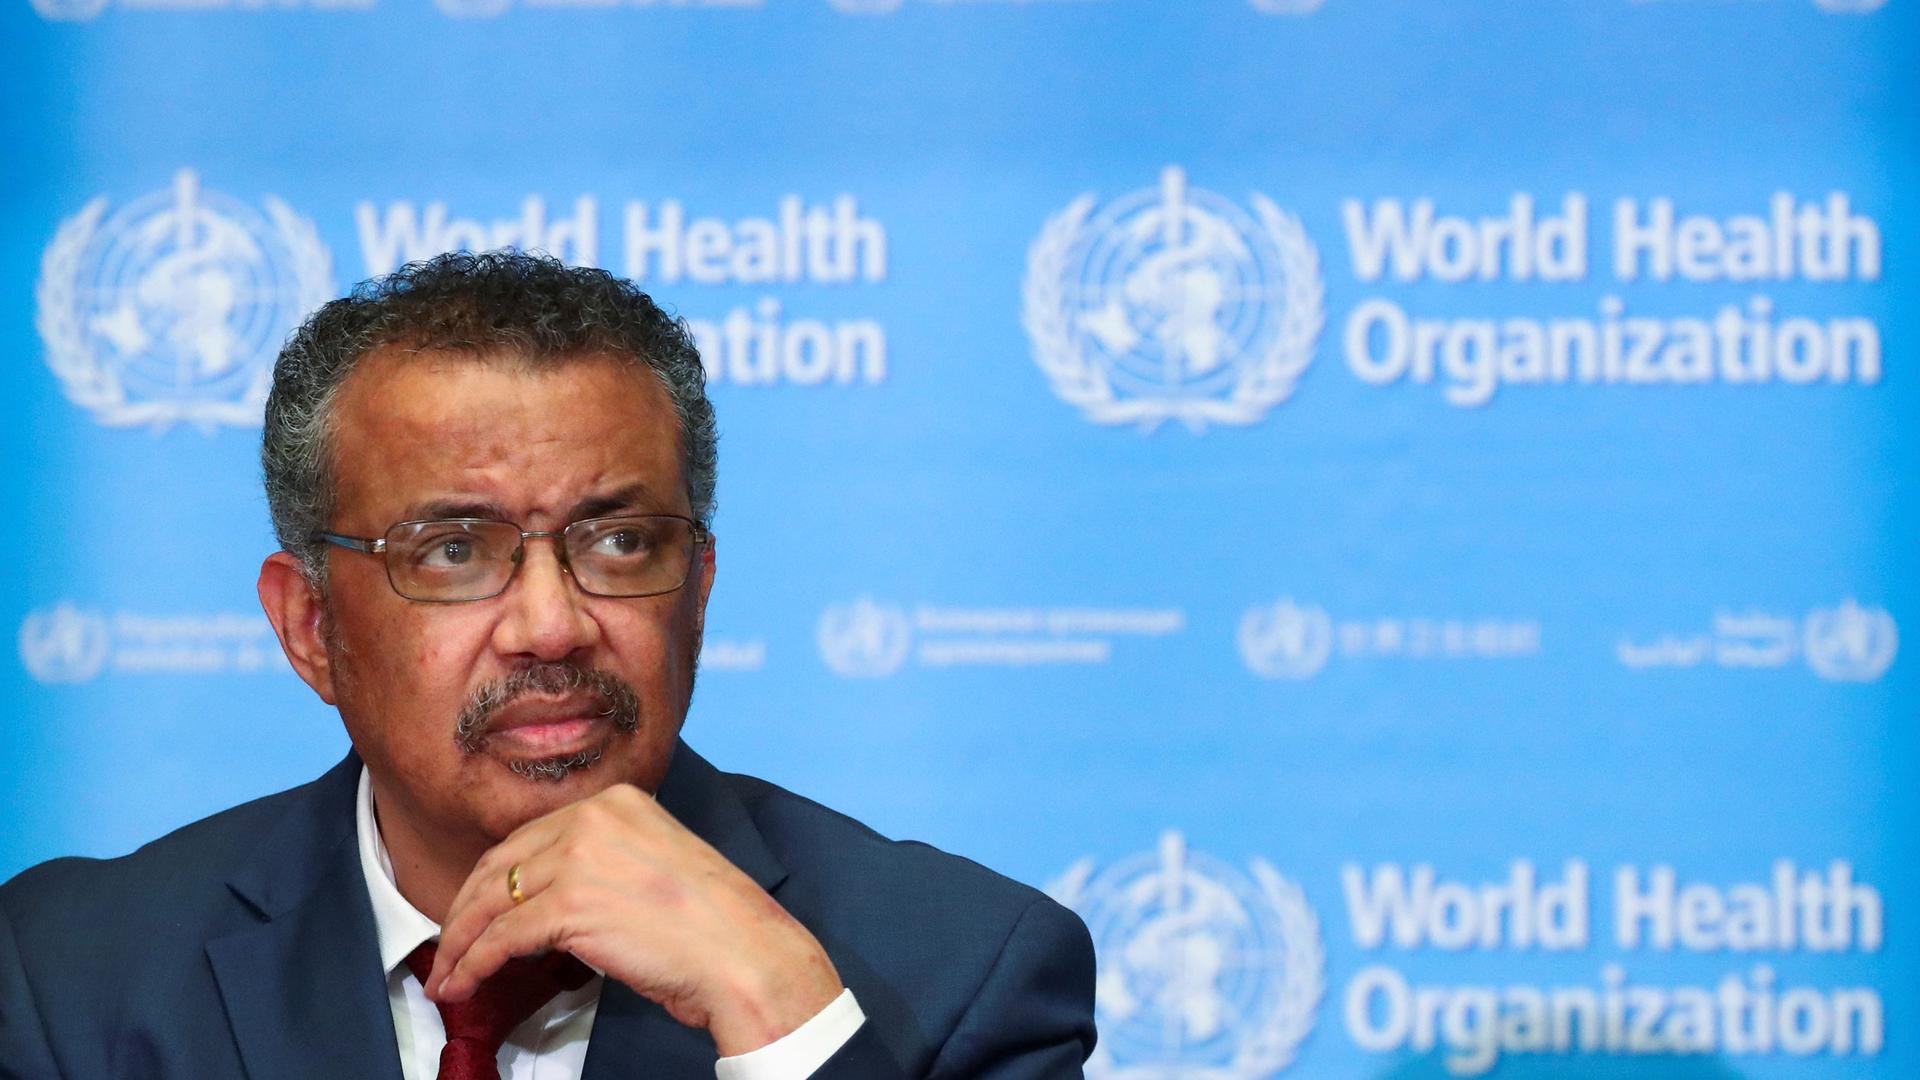 Tedros Adhanom Ghebreyesus is shown sitting with a red tied and jacket with his hand on his chin.